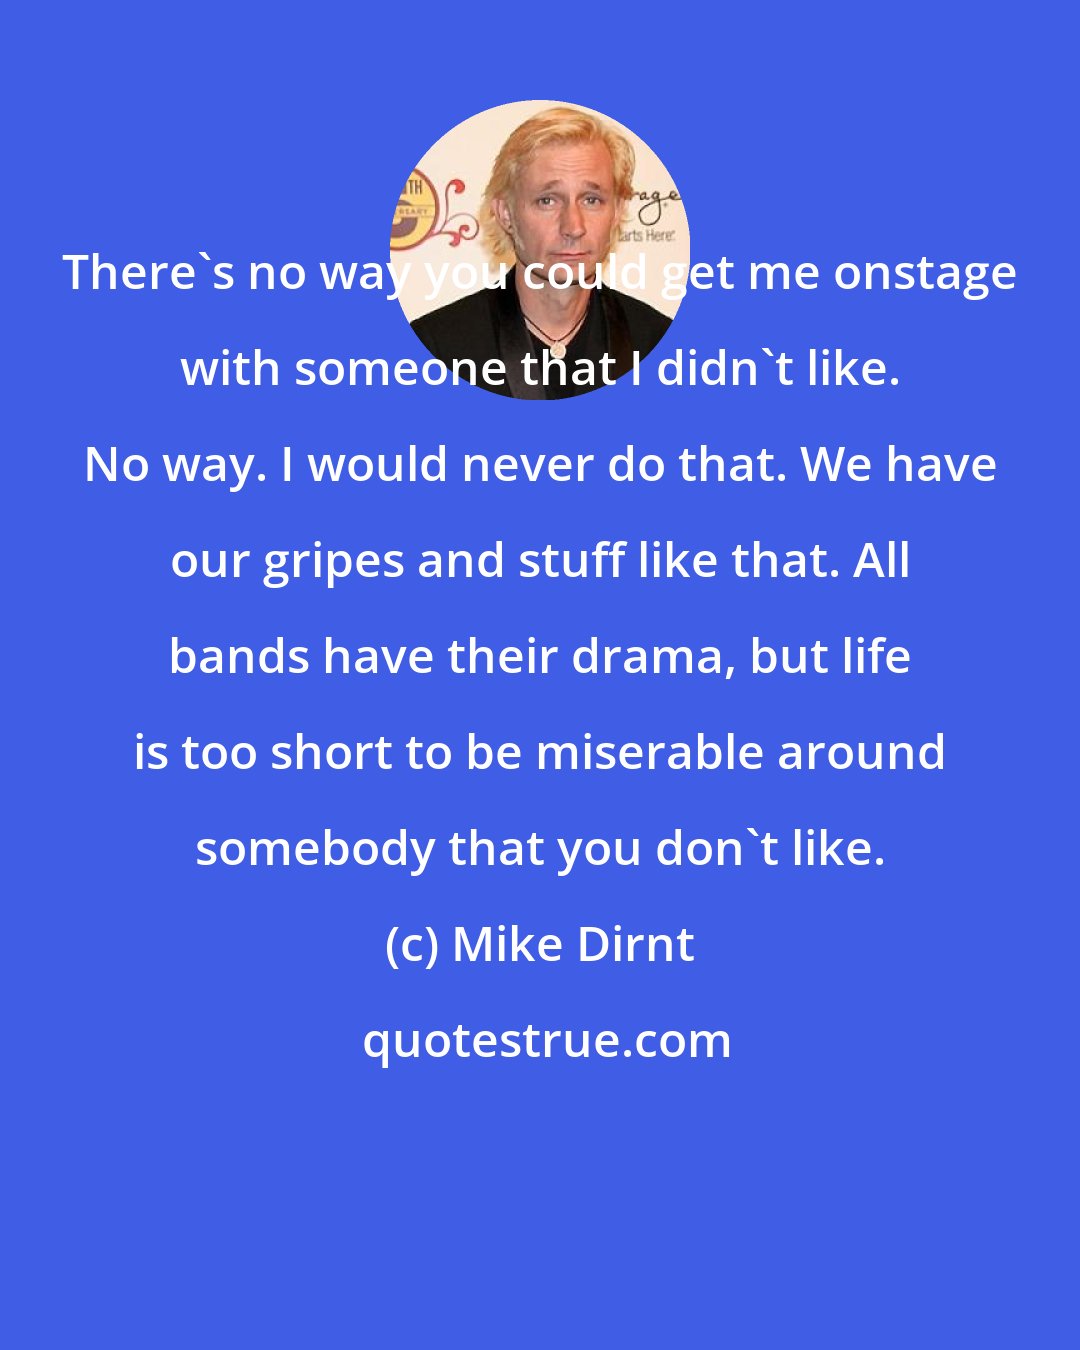 Mike Dirnt: There's no way you could get me onstage with someone that I didn't like. No way. I would never do that. We have our gripes and stuff like that. All bands have their drama, but life is too short to be miserable around somebody that you don't like.